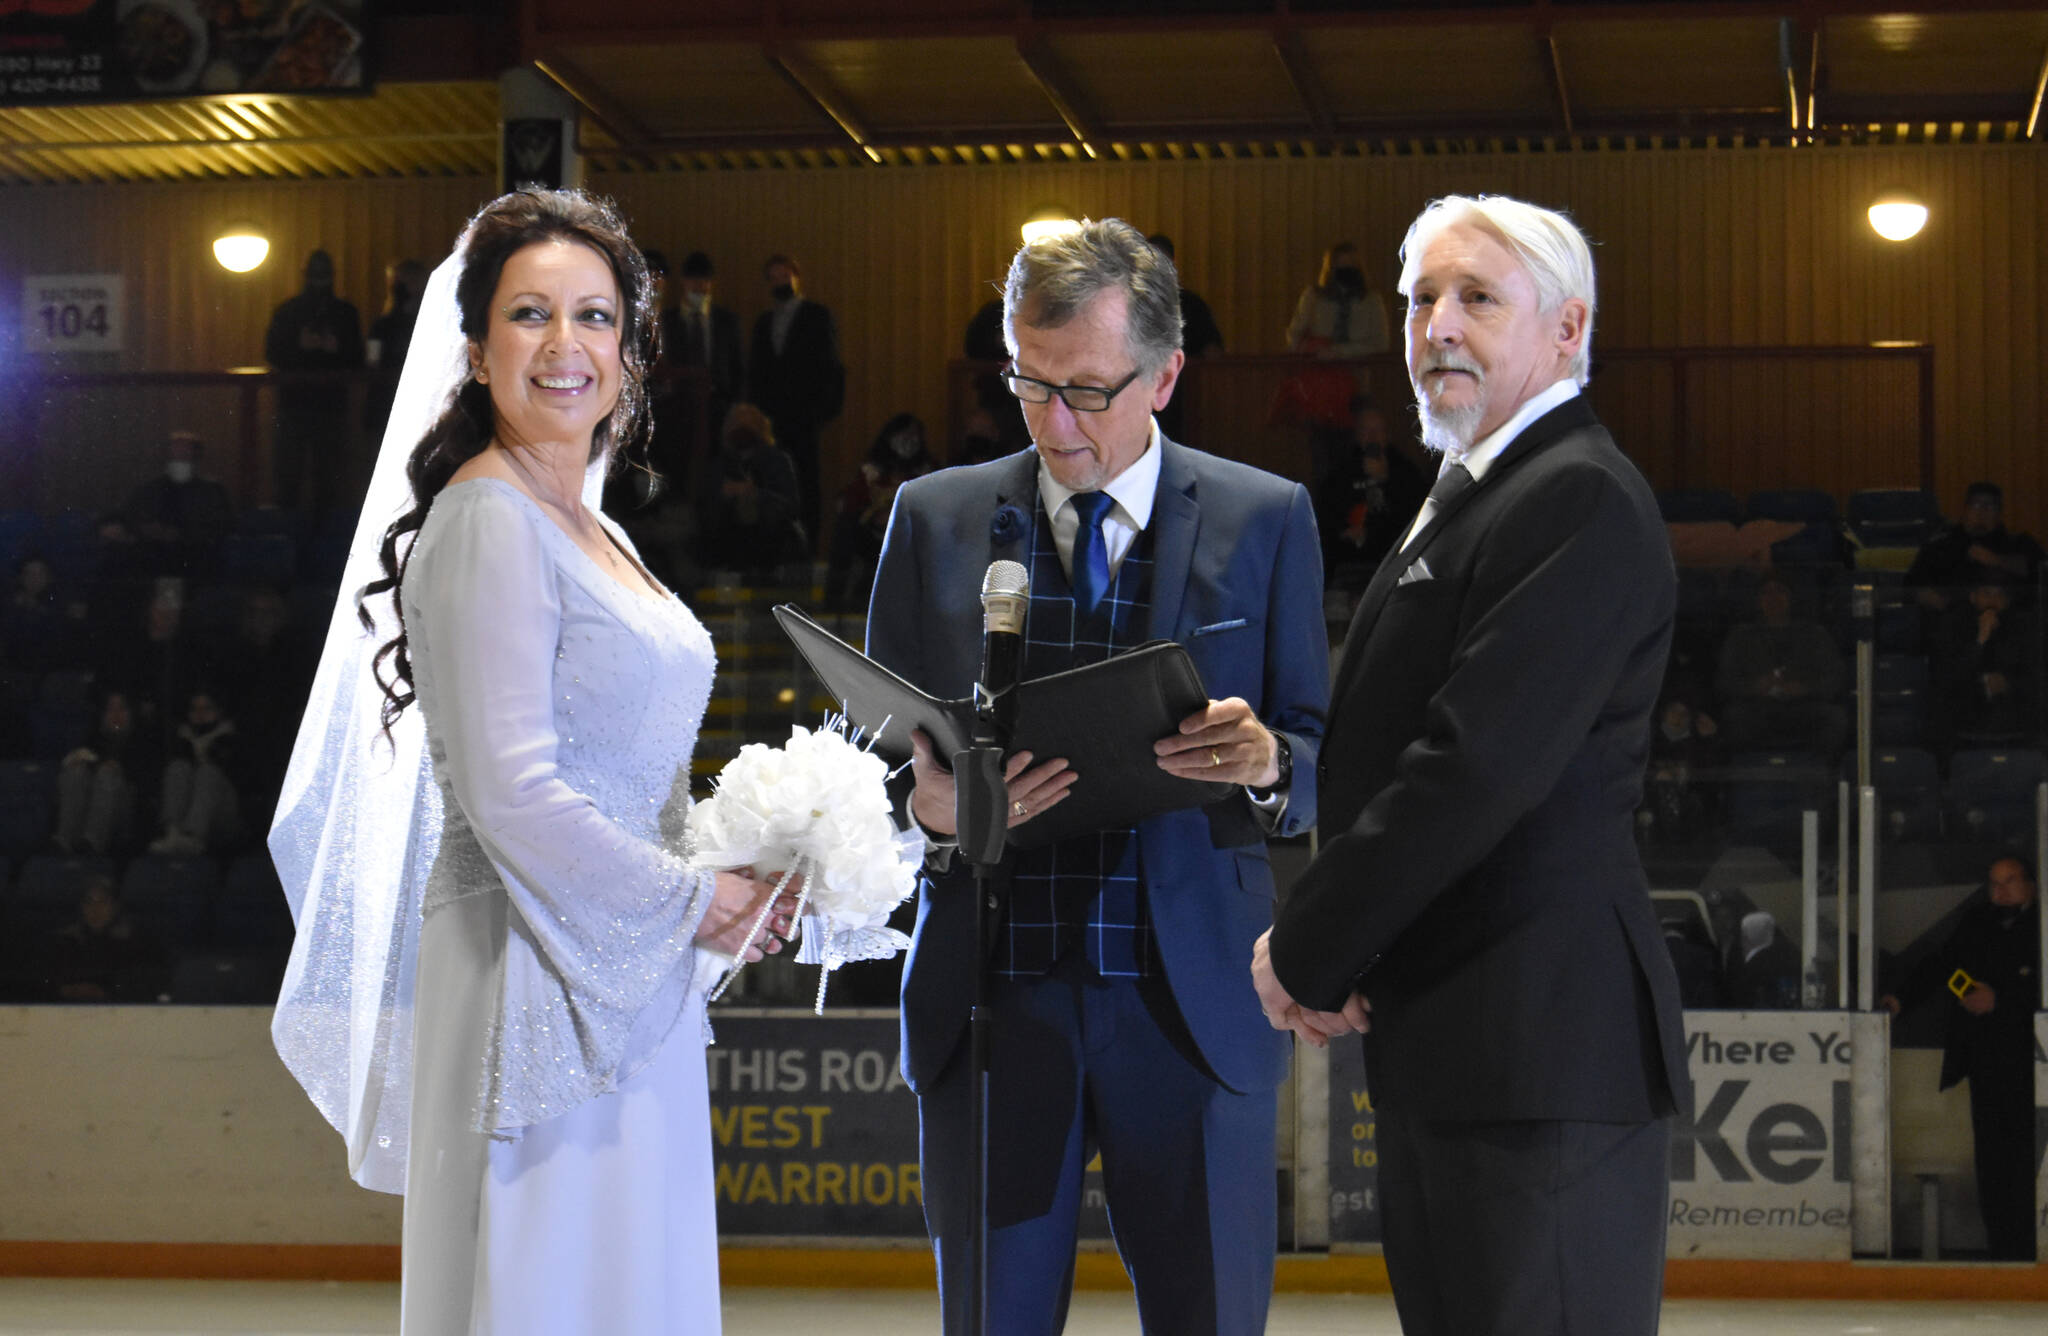 Radka Malyk and Jim Peck were married by West Kelowna Warrior’s Chaplain Don Richmond during the November 27 game. (Cole Schisler photo)